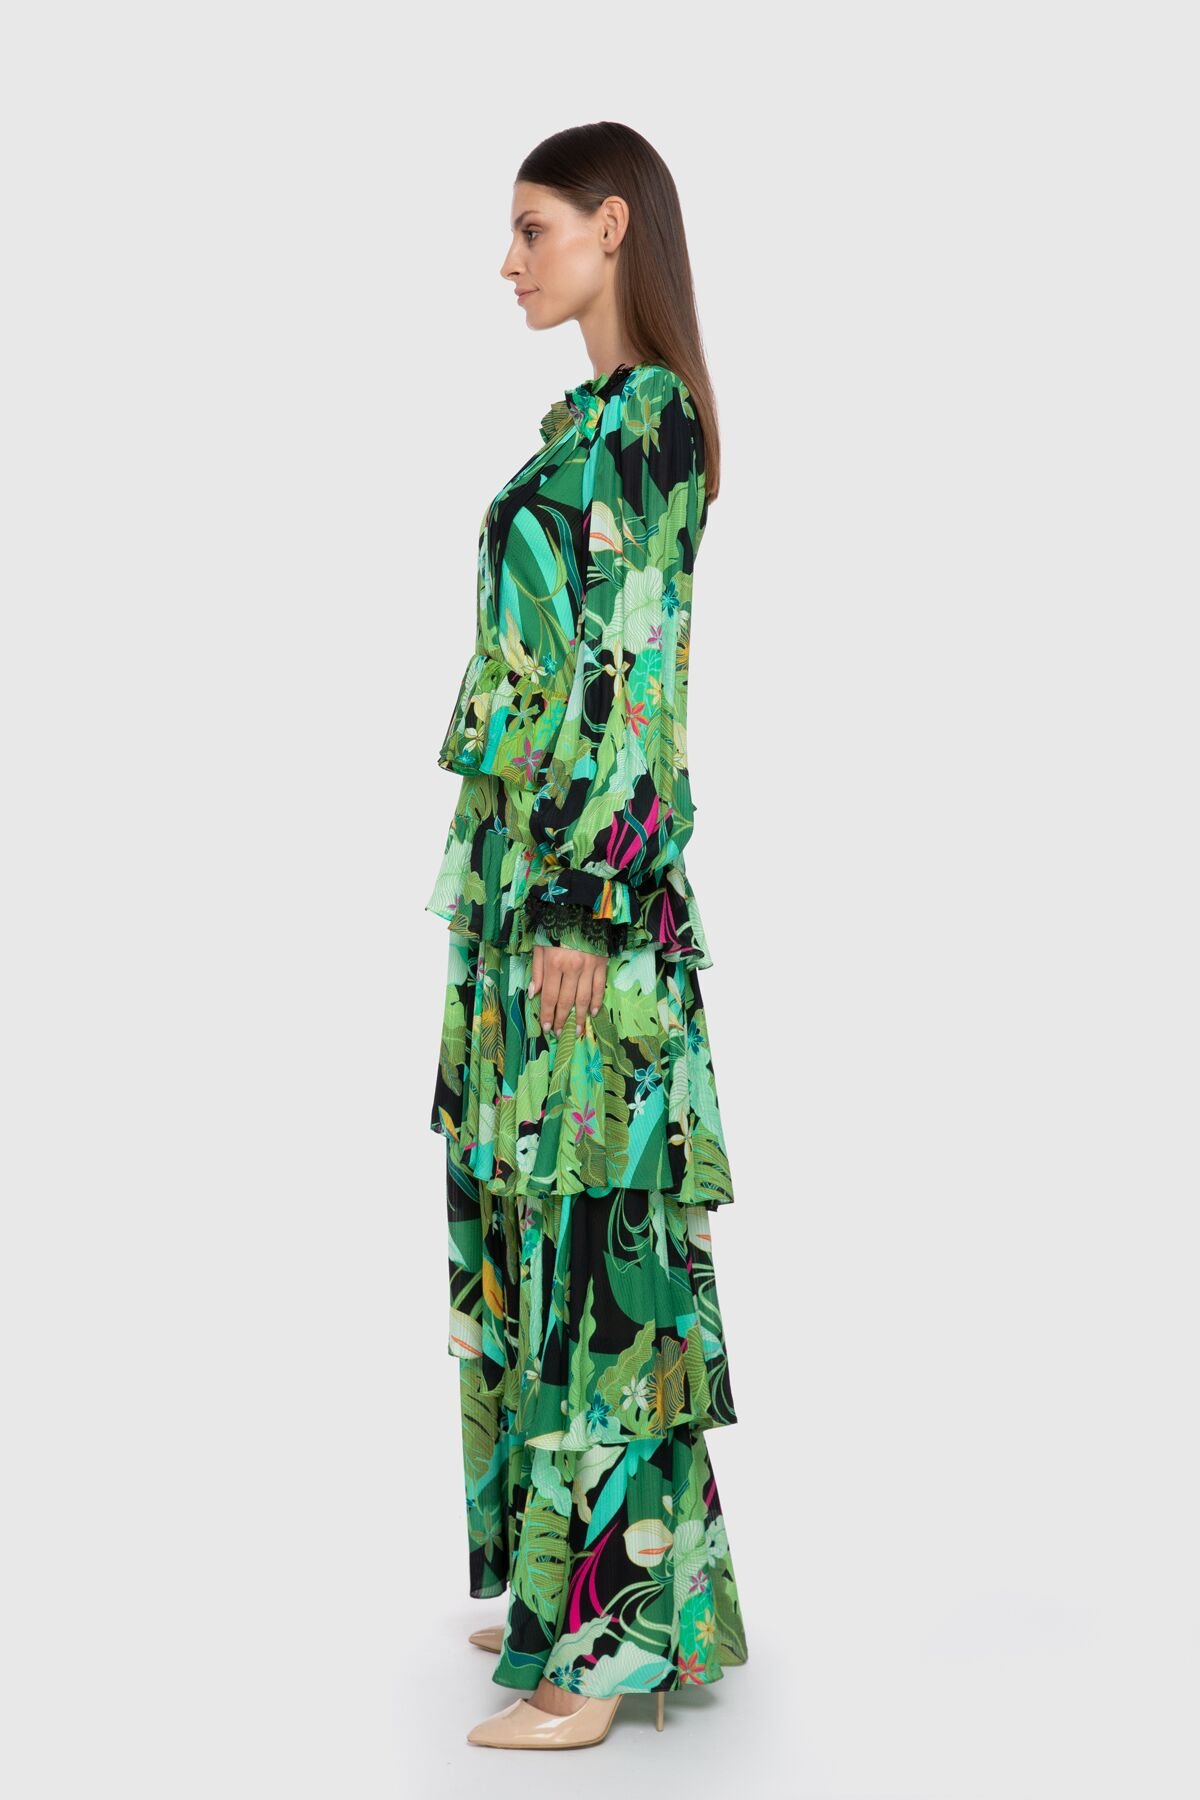 Embroidered Detailed Long Green Chiffon Dress